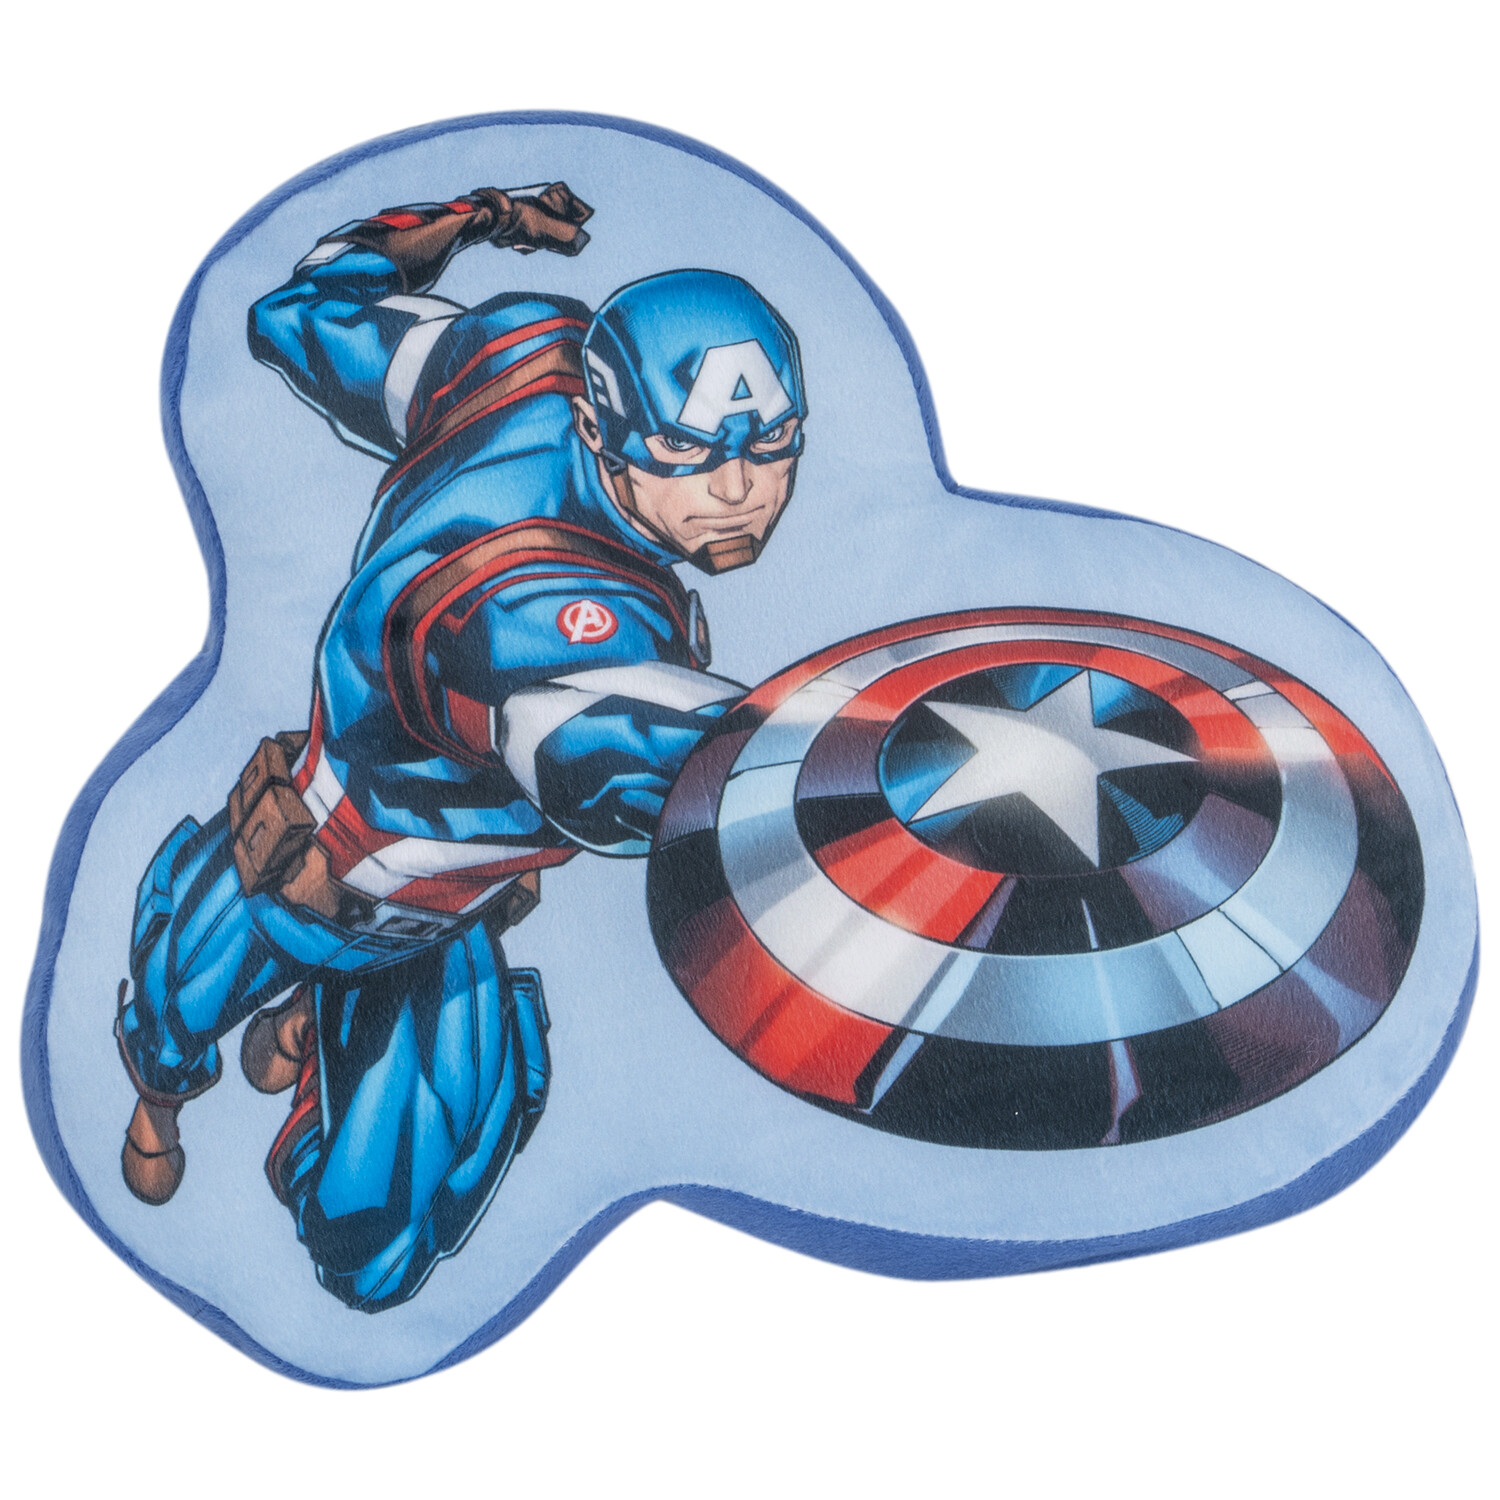 Single Marvel Avengers Cushion 35cm in Assorted styles Image 1